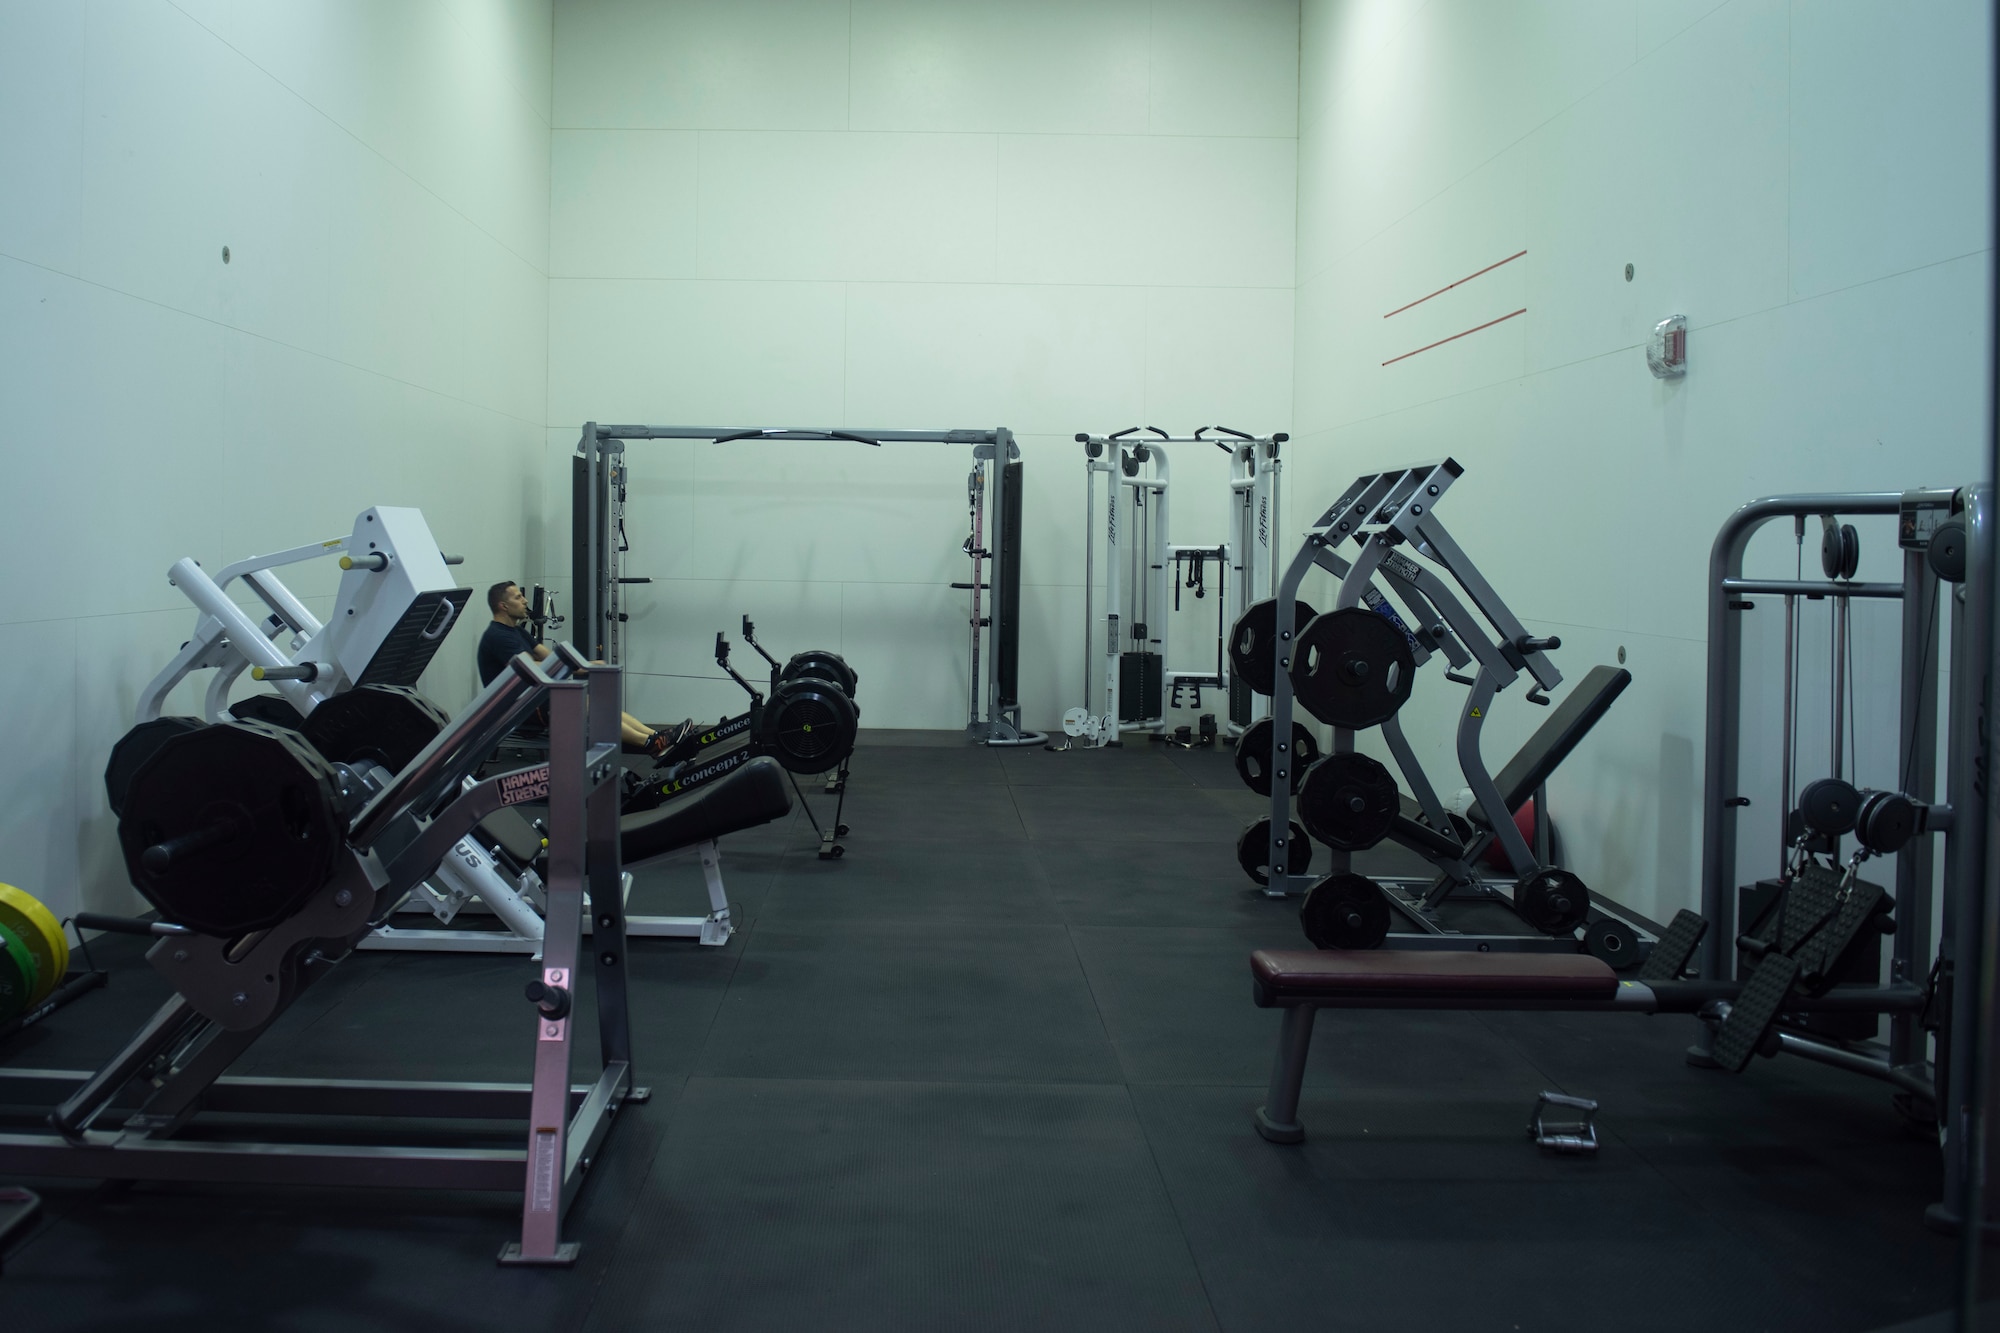 The fitness center’s racquetball court was converted into a weight room for social distancing. The process was completed on June 16, 2020, at Schriever Air Force Base, Colorado. The machines allow for exercises from leg presses to tricep pulldown machines. (U.S. Air Force photo by Cara Cannello)